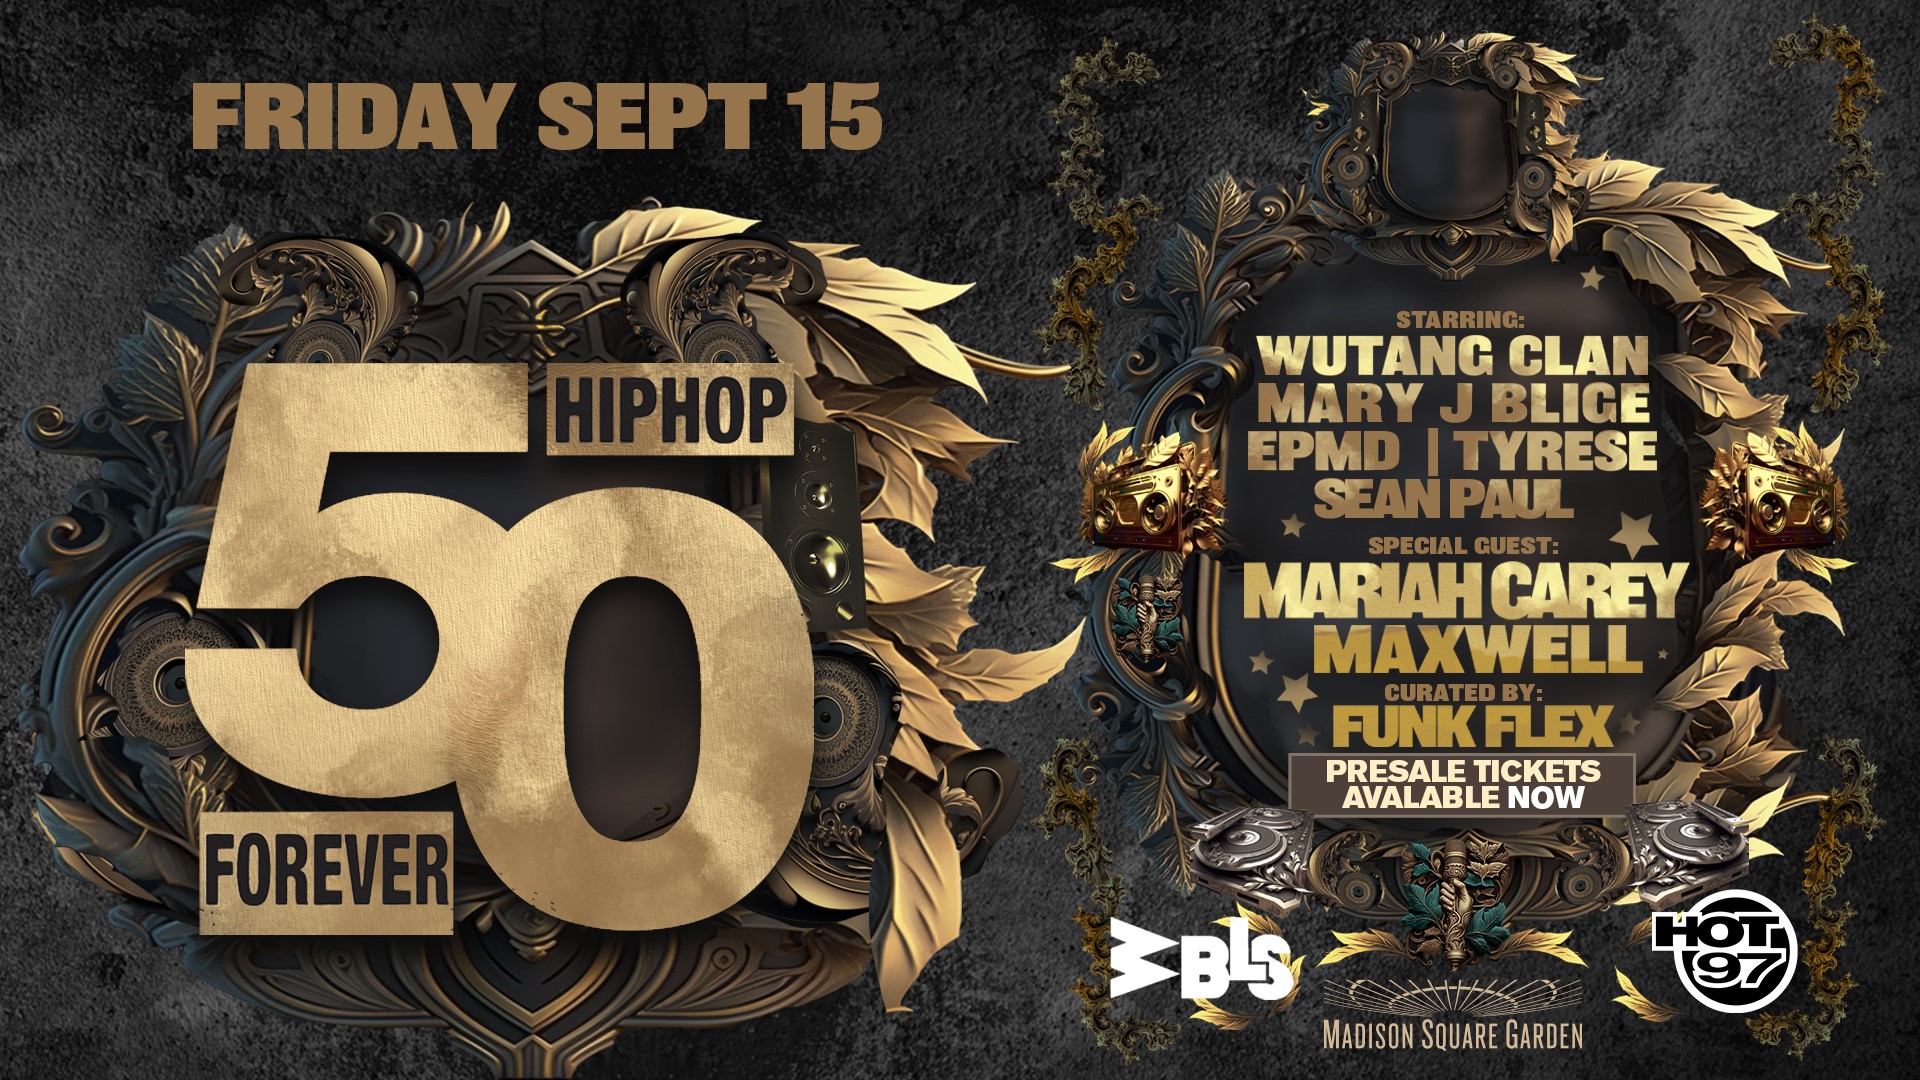 Hot 97 Announces ‘Hip Hop 50’ Concert with Wu-Tang Clan, Mary J. Blige, EPMD, Mariah Carey, More